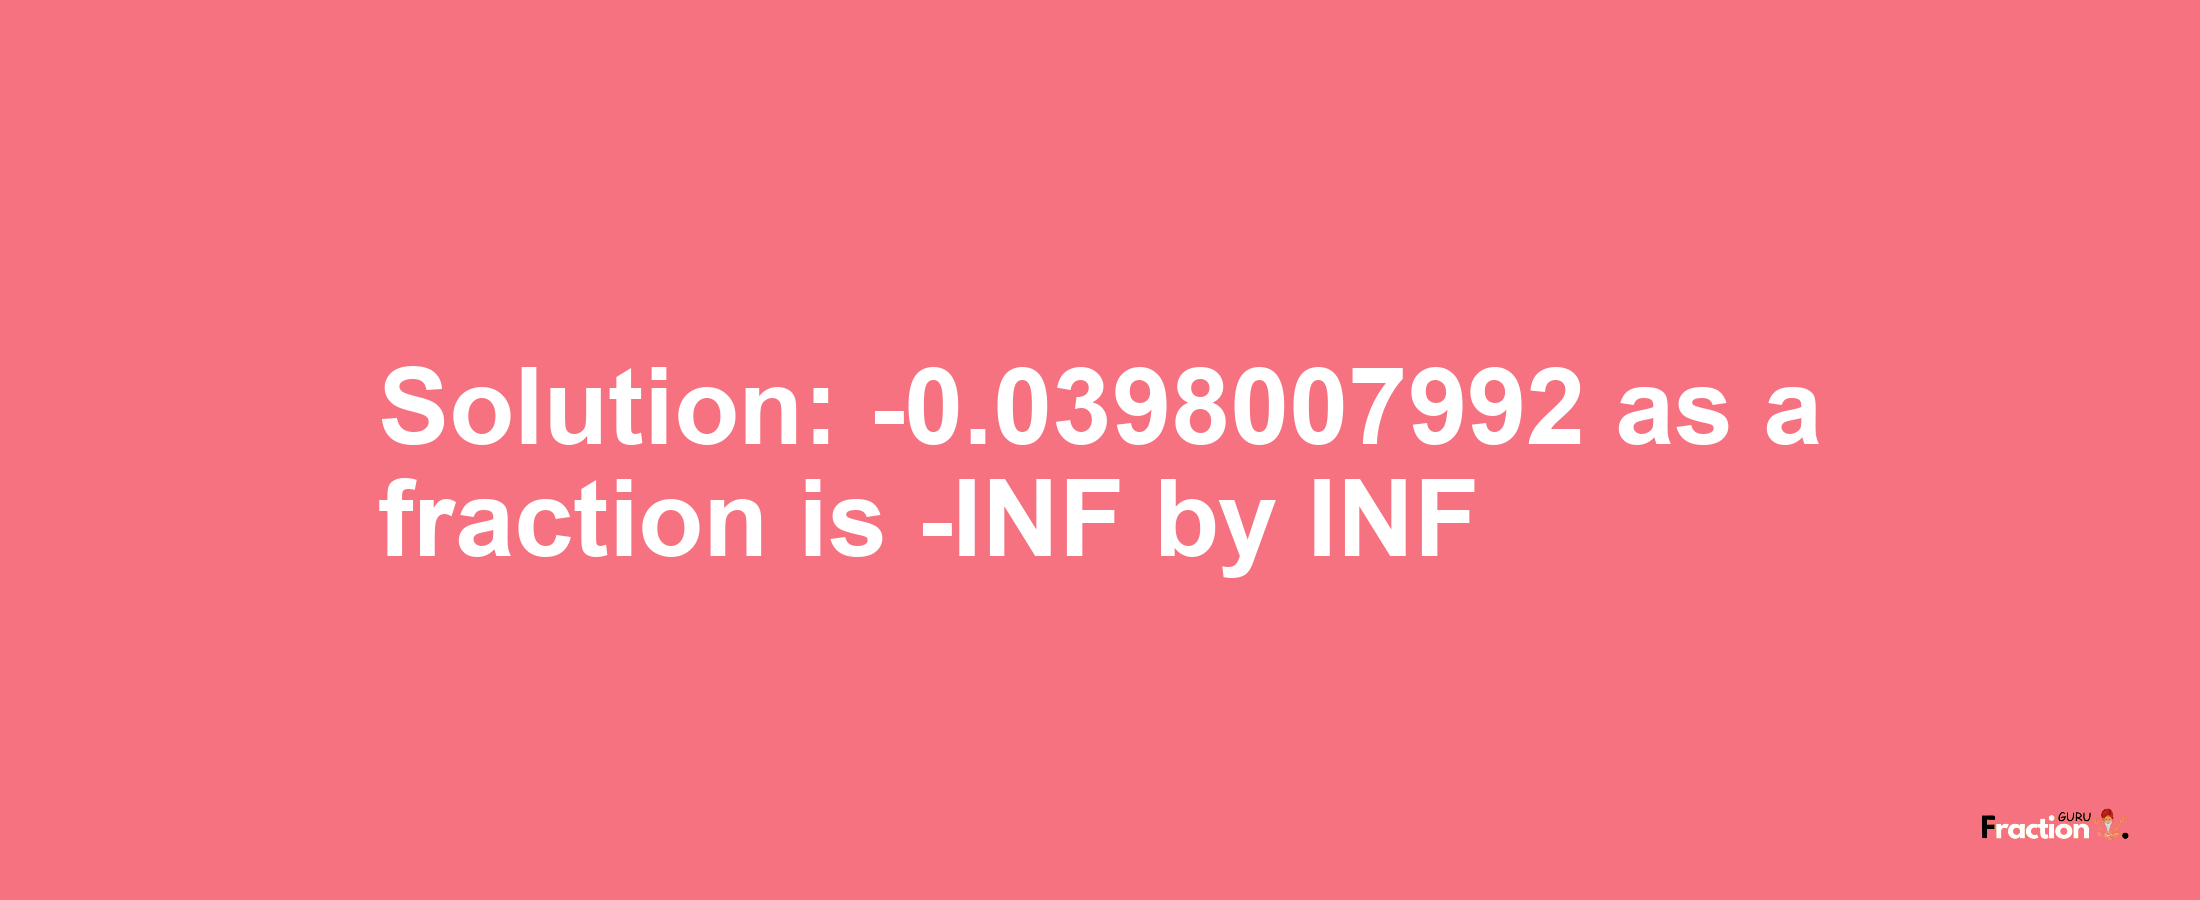 Solution:-0.0398007992 as a fraction is -INF/INF